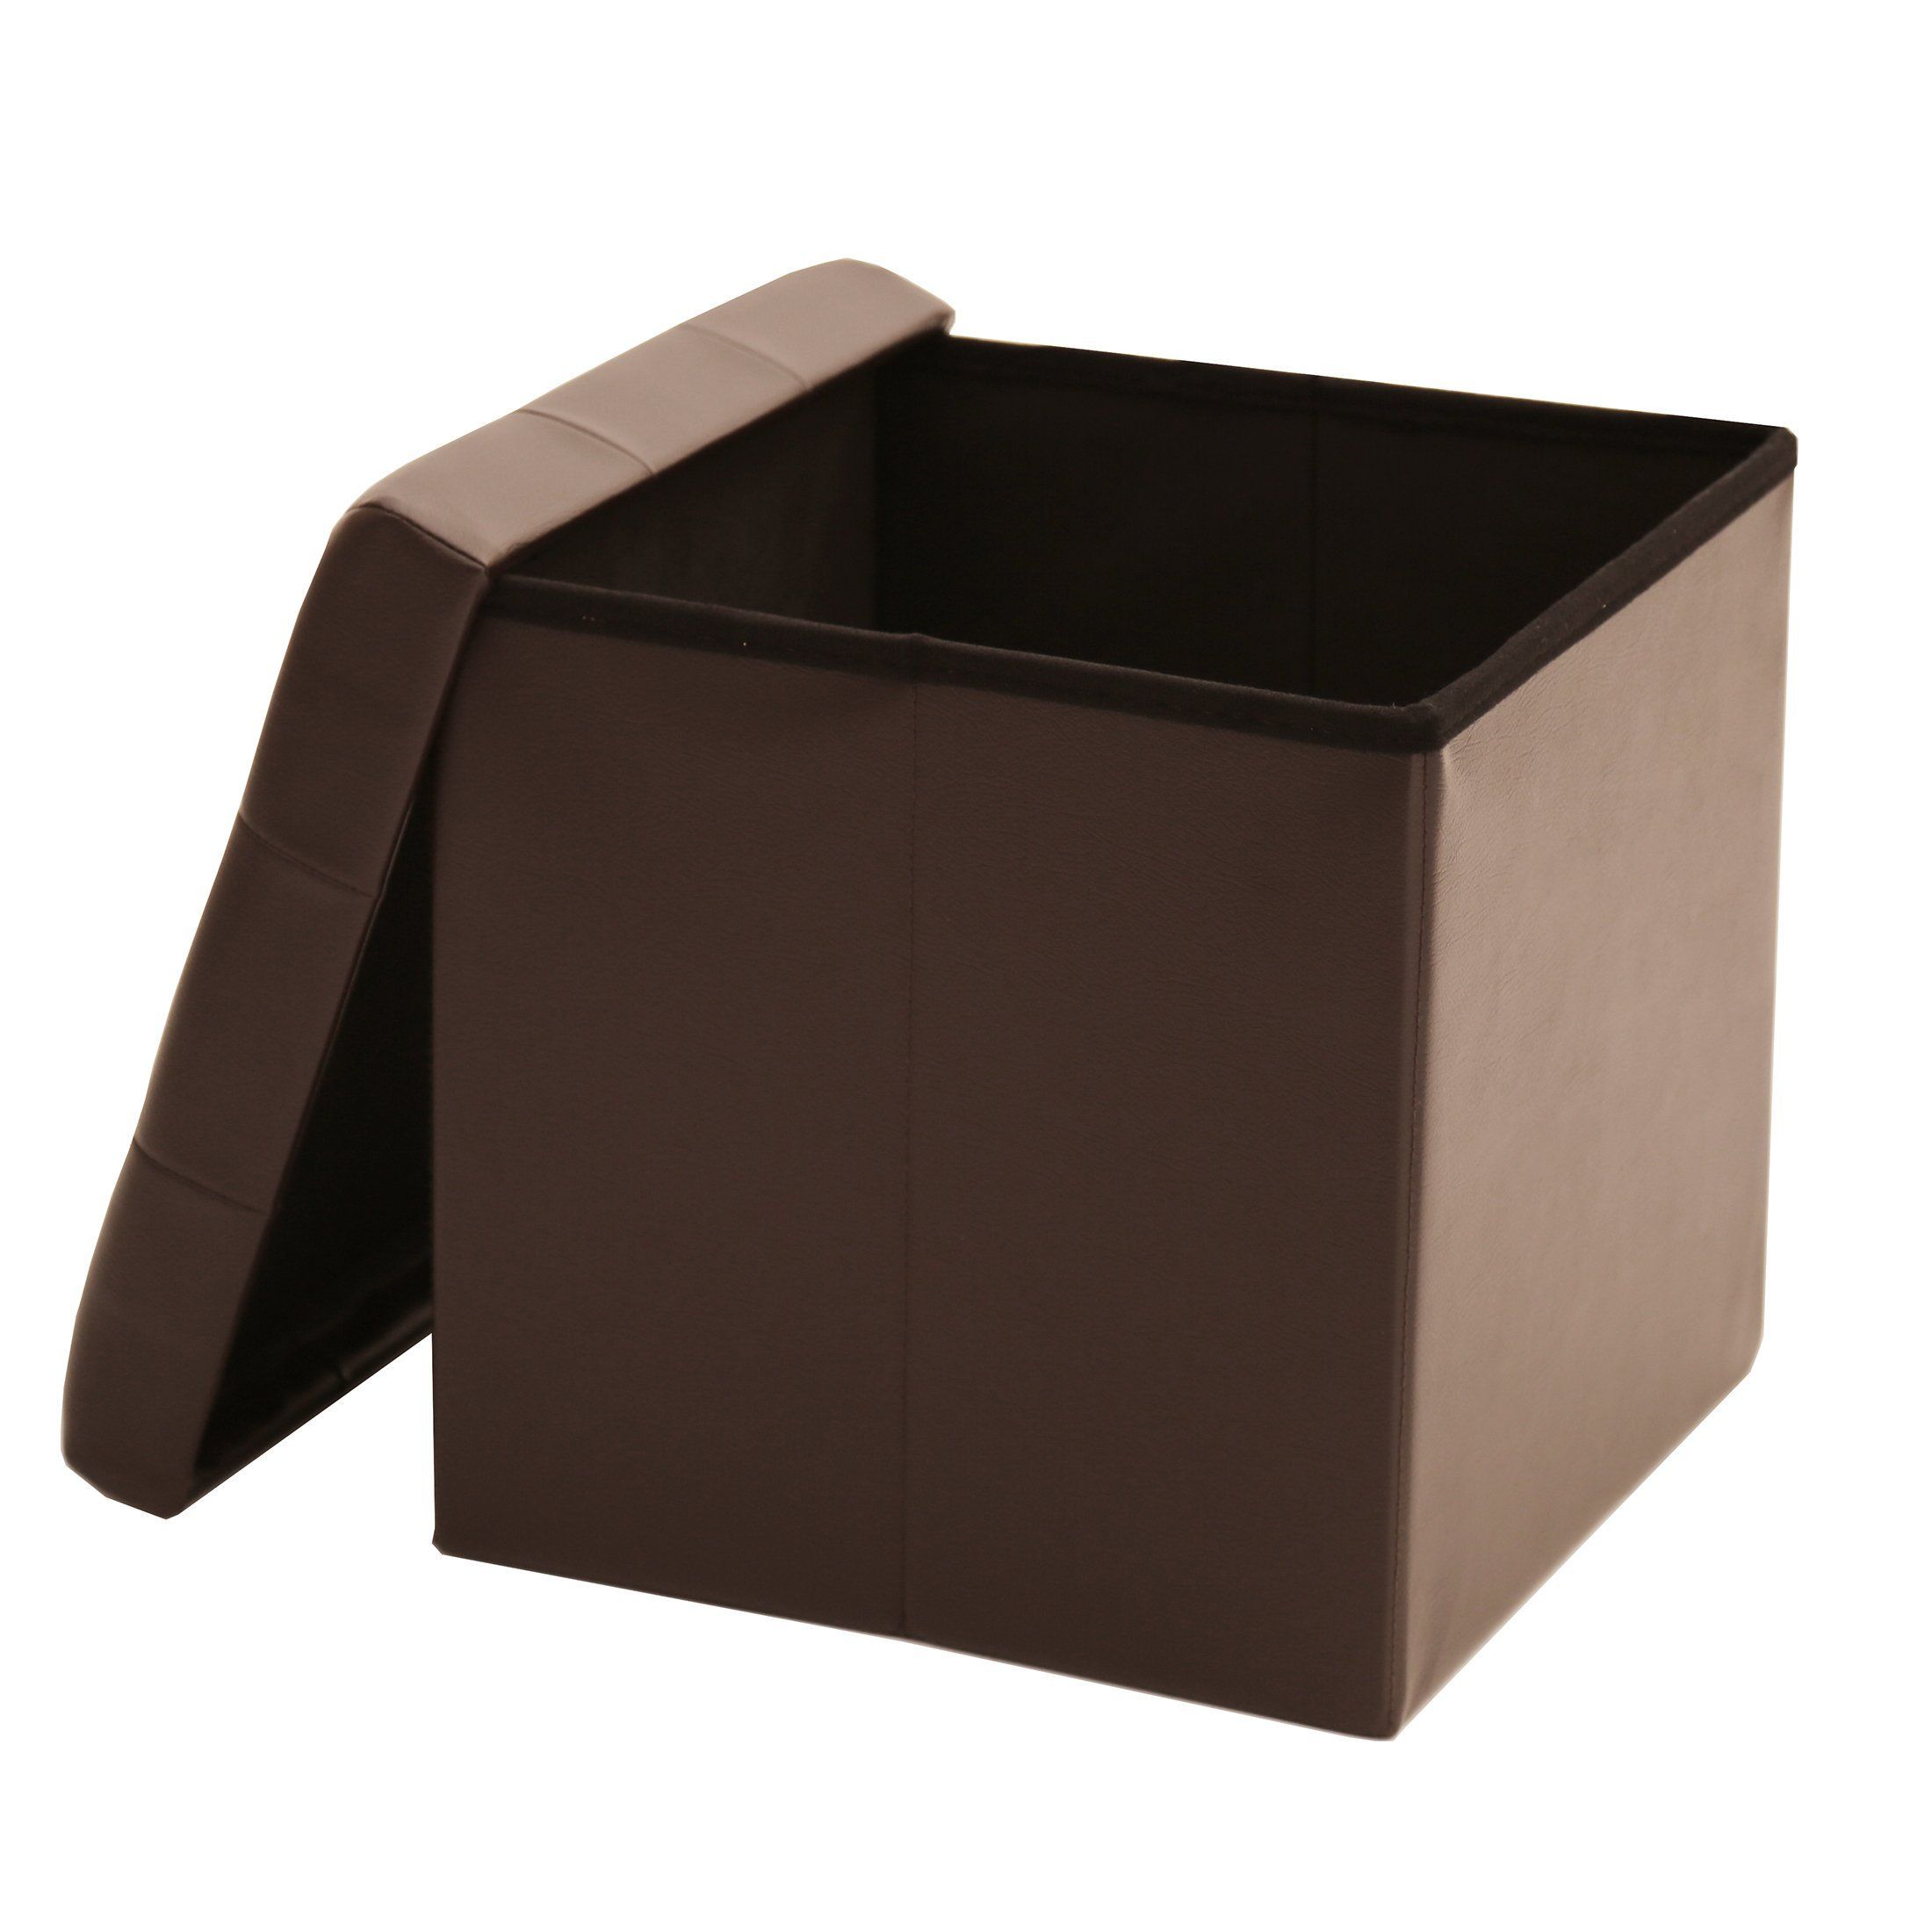 Seville Classics Foldable Faux Leather Storage Ottoman Espresso — You For Beige And Dark Gray Ombre Cylinder Pouf Ottomans (View 13 of 20)